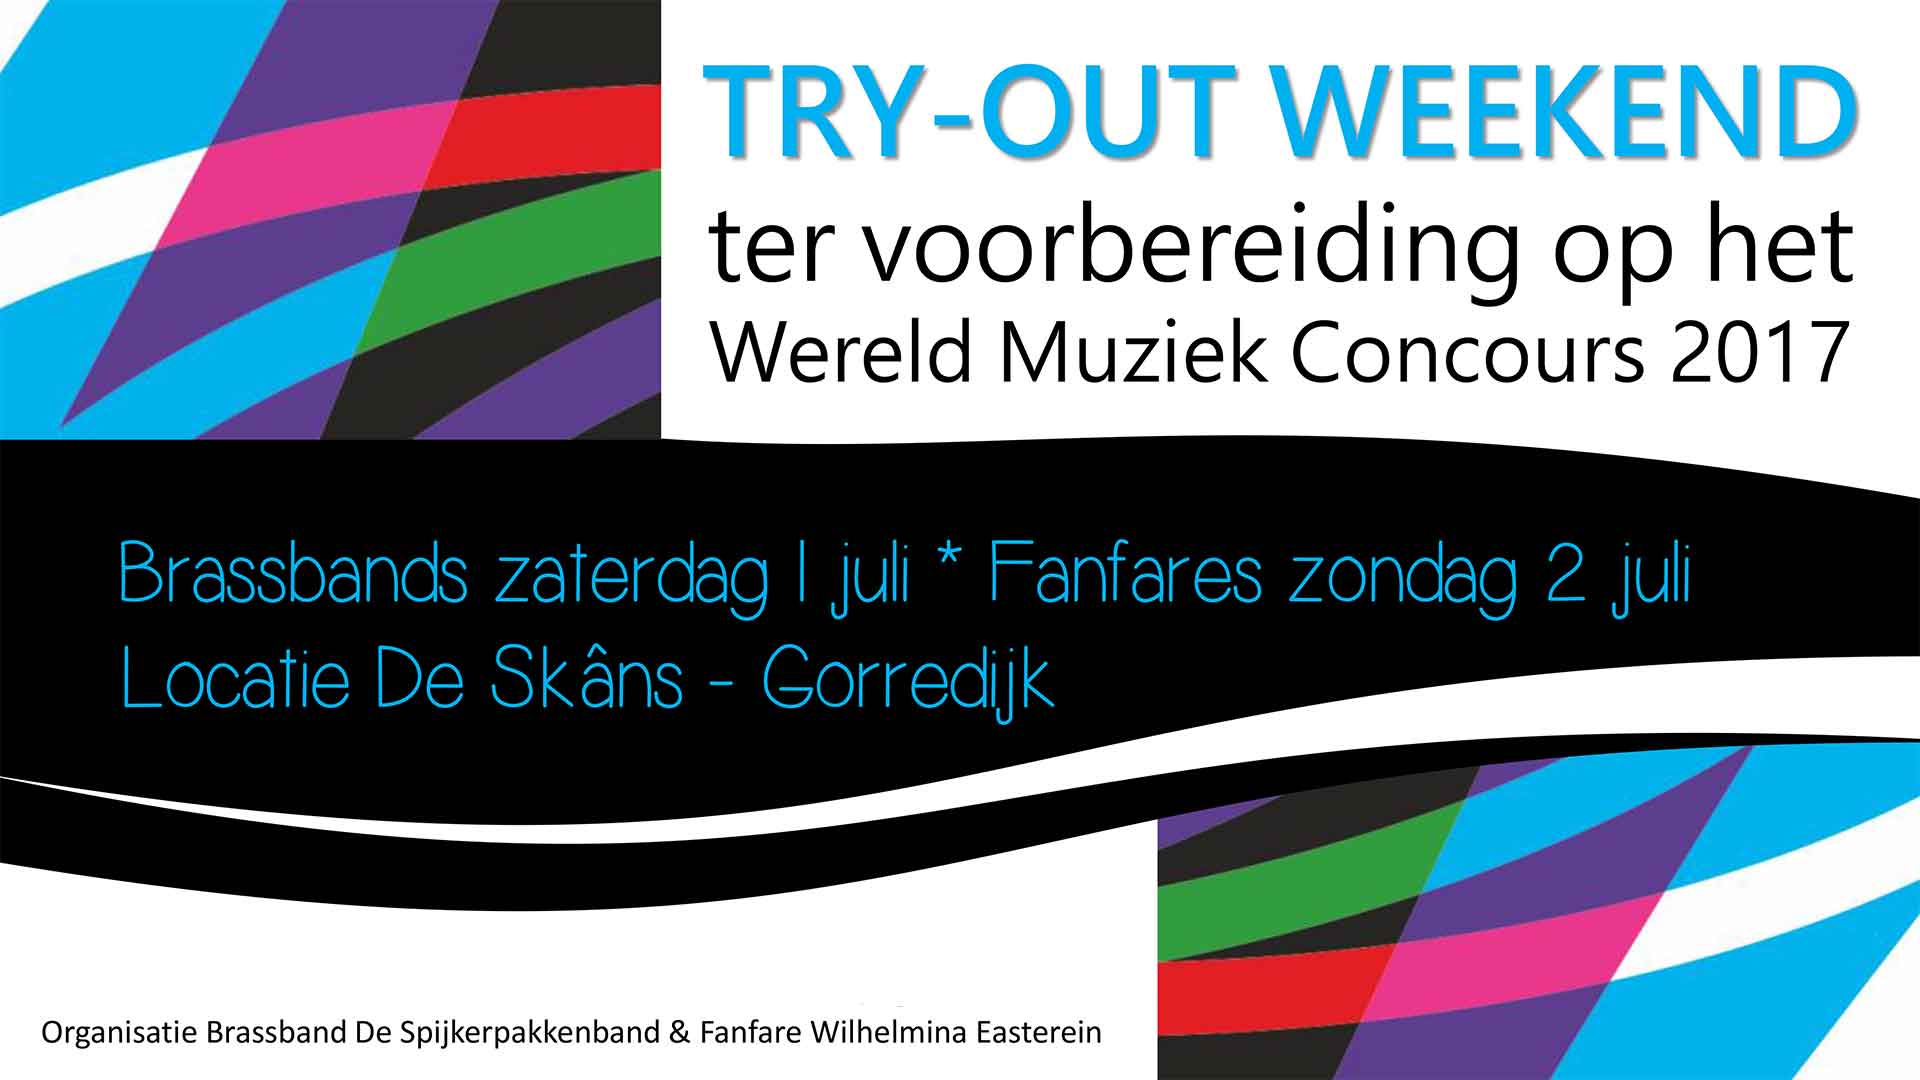 Try-out weekend WMC 2017 in Gorredijk